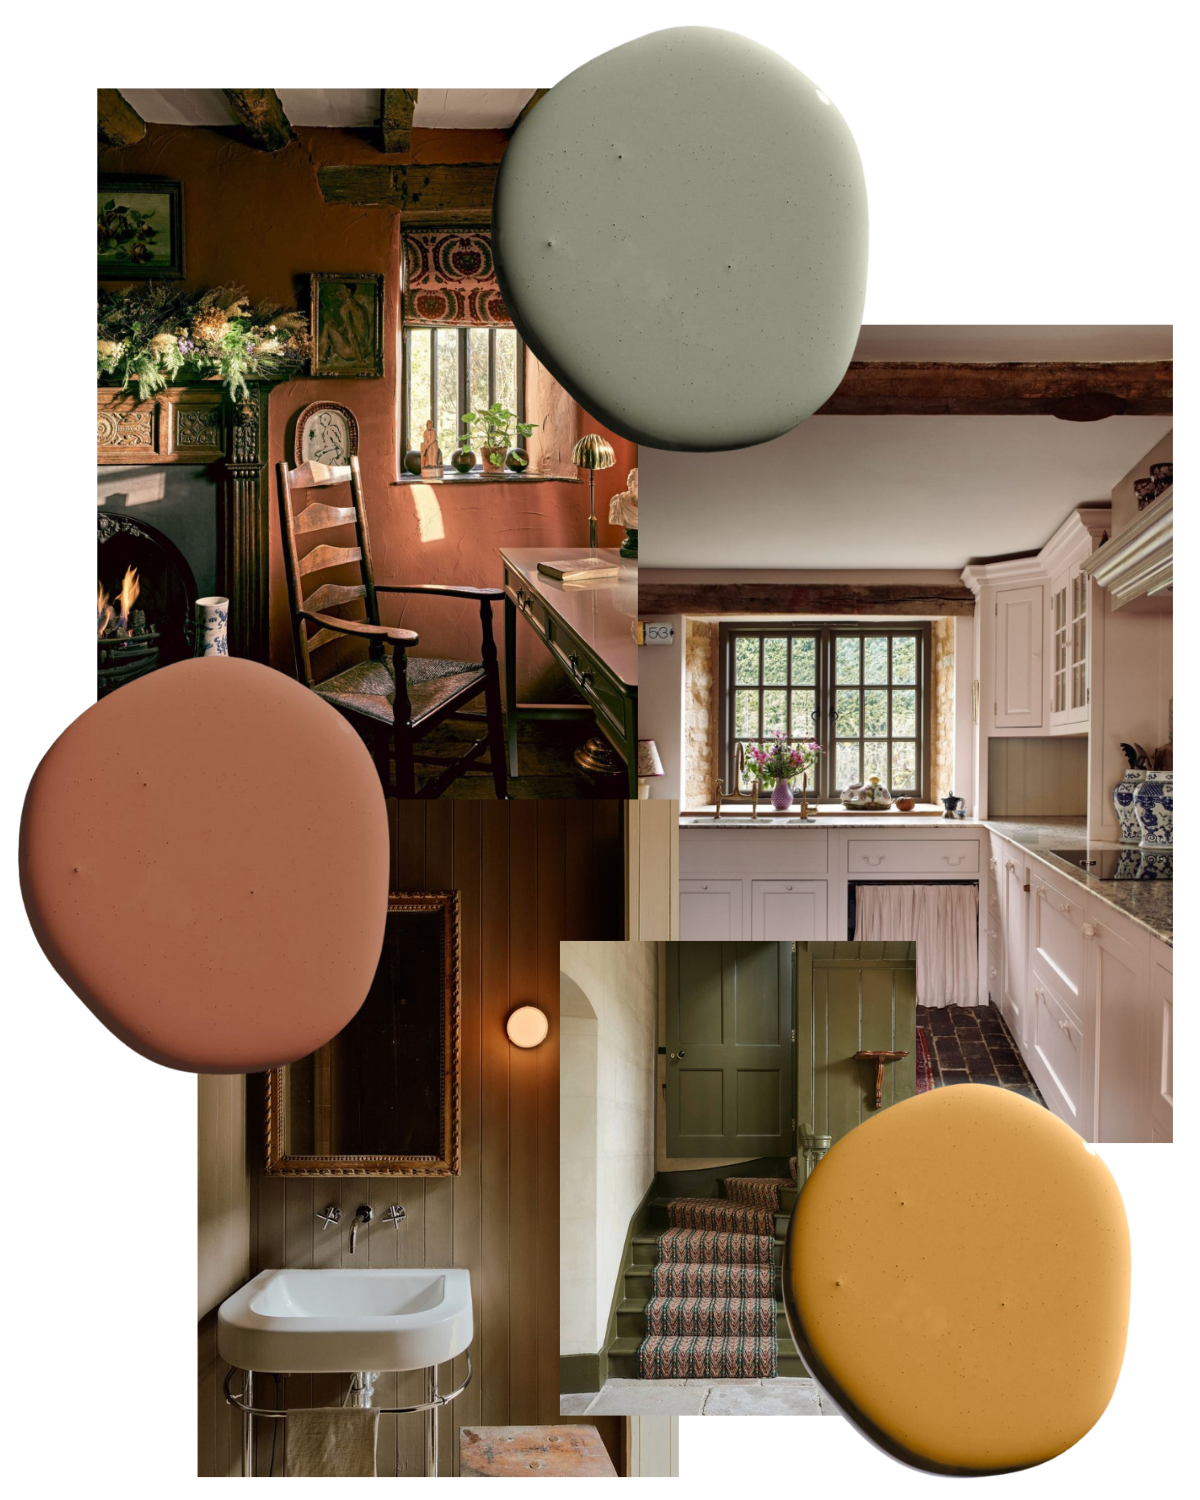 Collaboration of images showcasing different paint colors and color schemes throughout different interior images of homes.